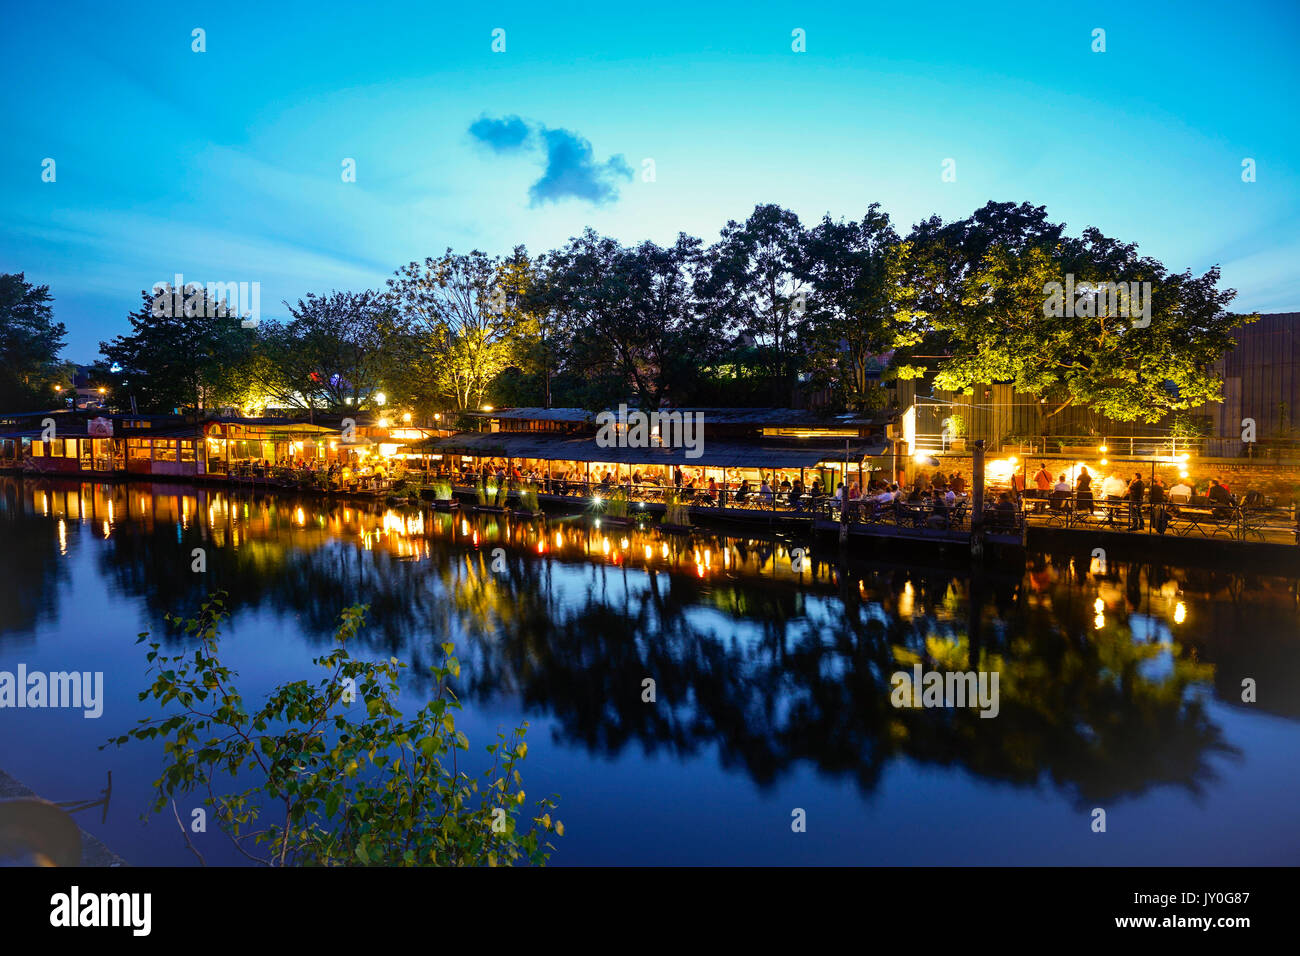 Freischwimmer cafe and bar beside canal in Kreuzberg , Berlin at night.Germany Stock Photo